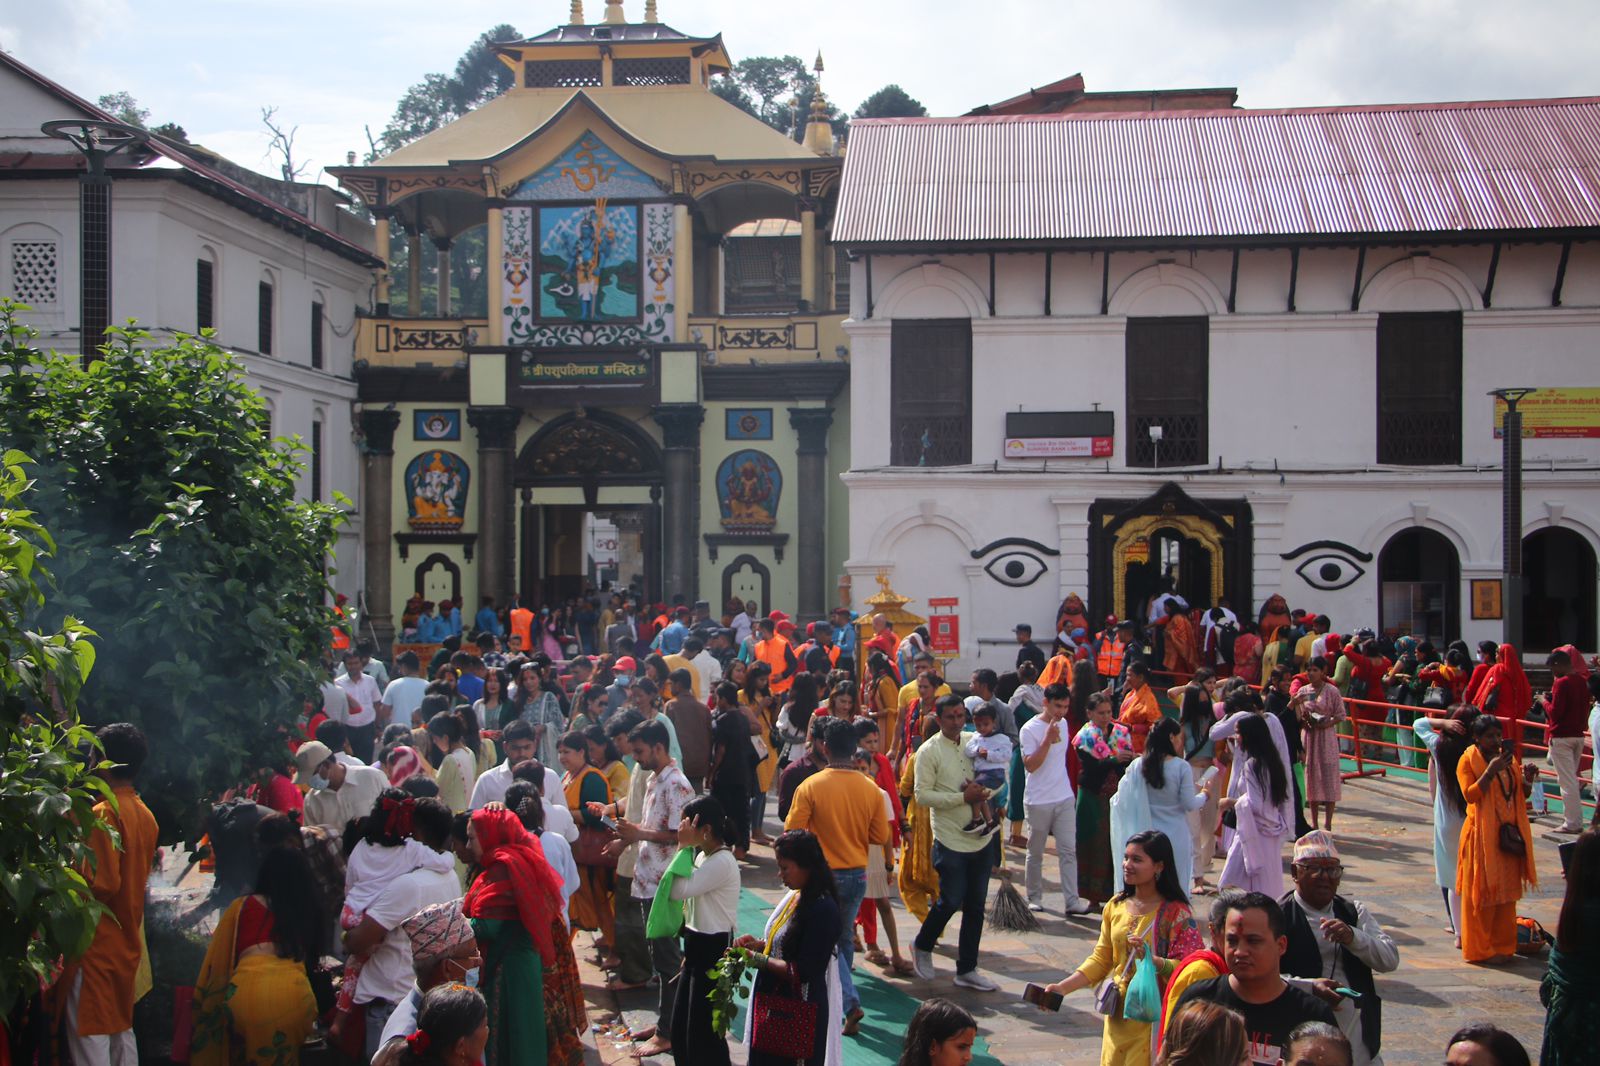 IN PICTURES: Devotees throng Pashupatinath temple on first Monday of Shrawan